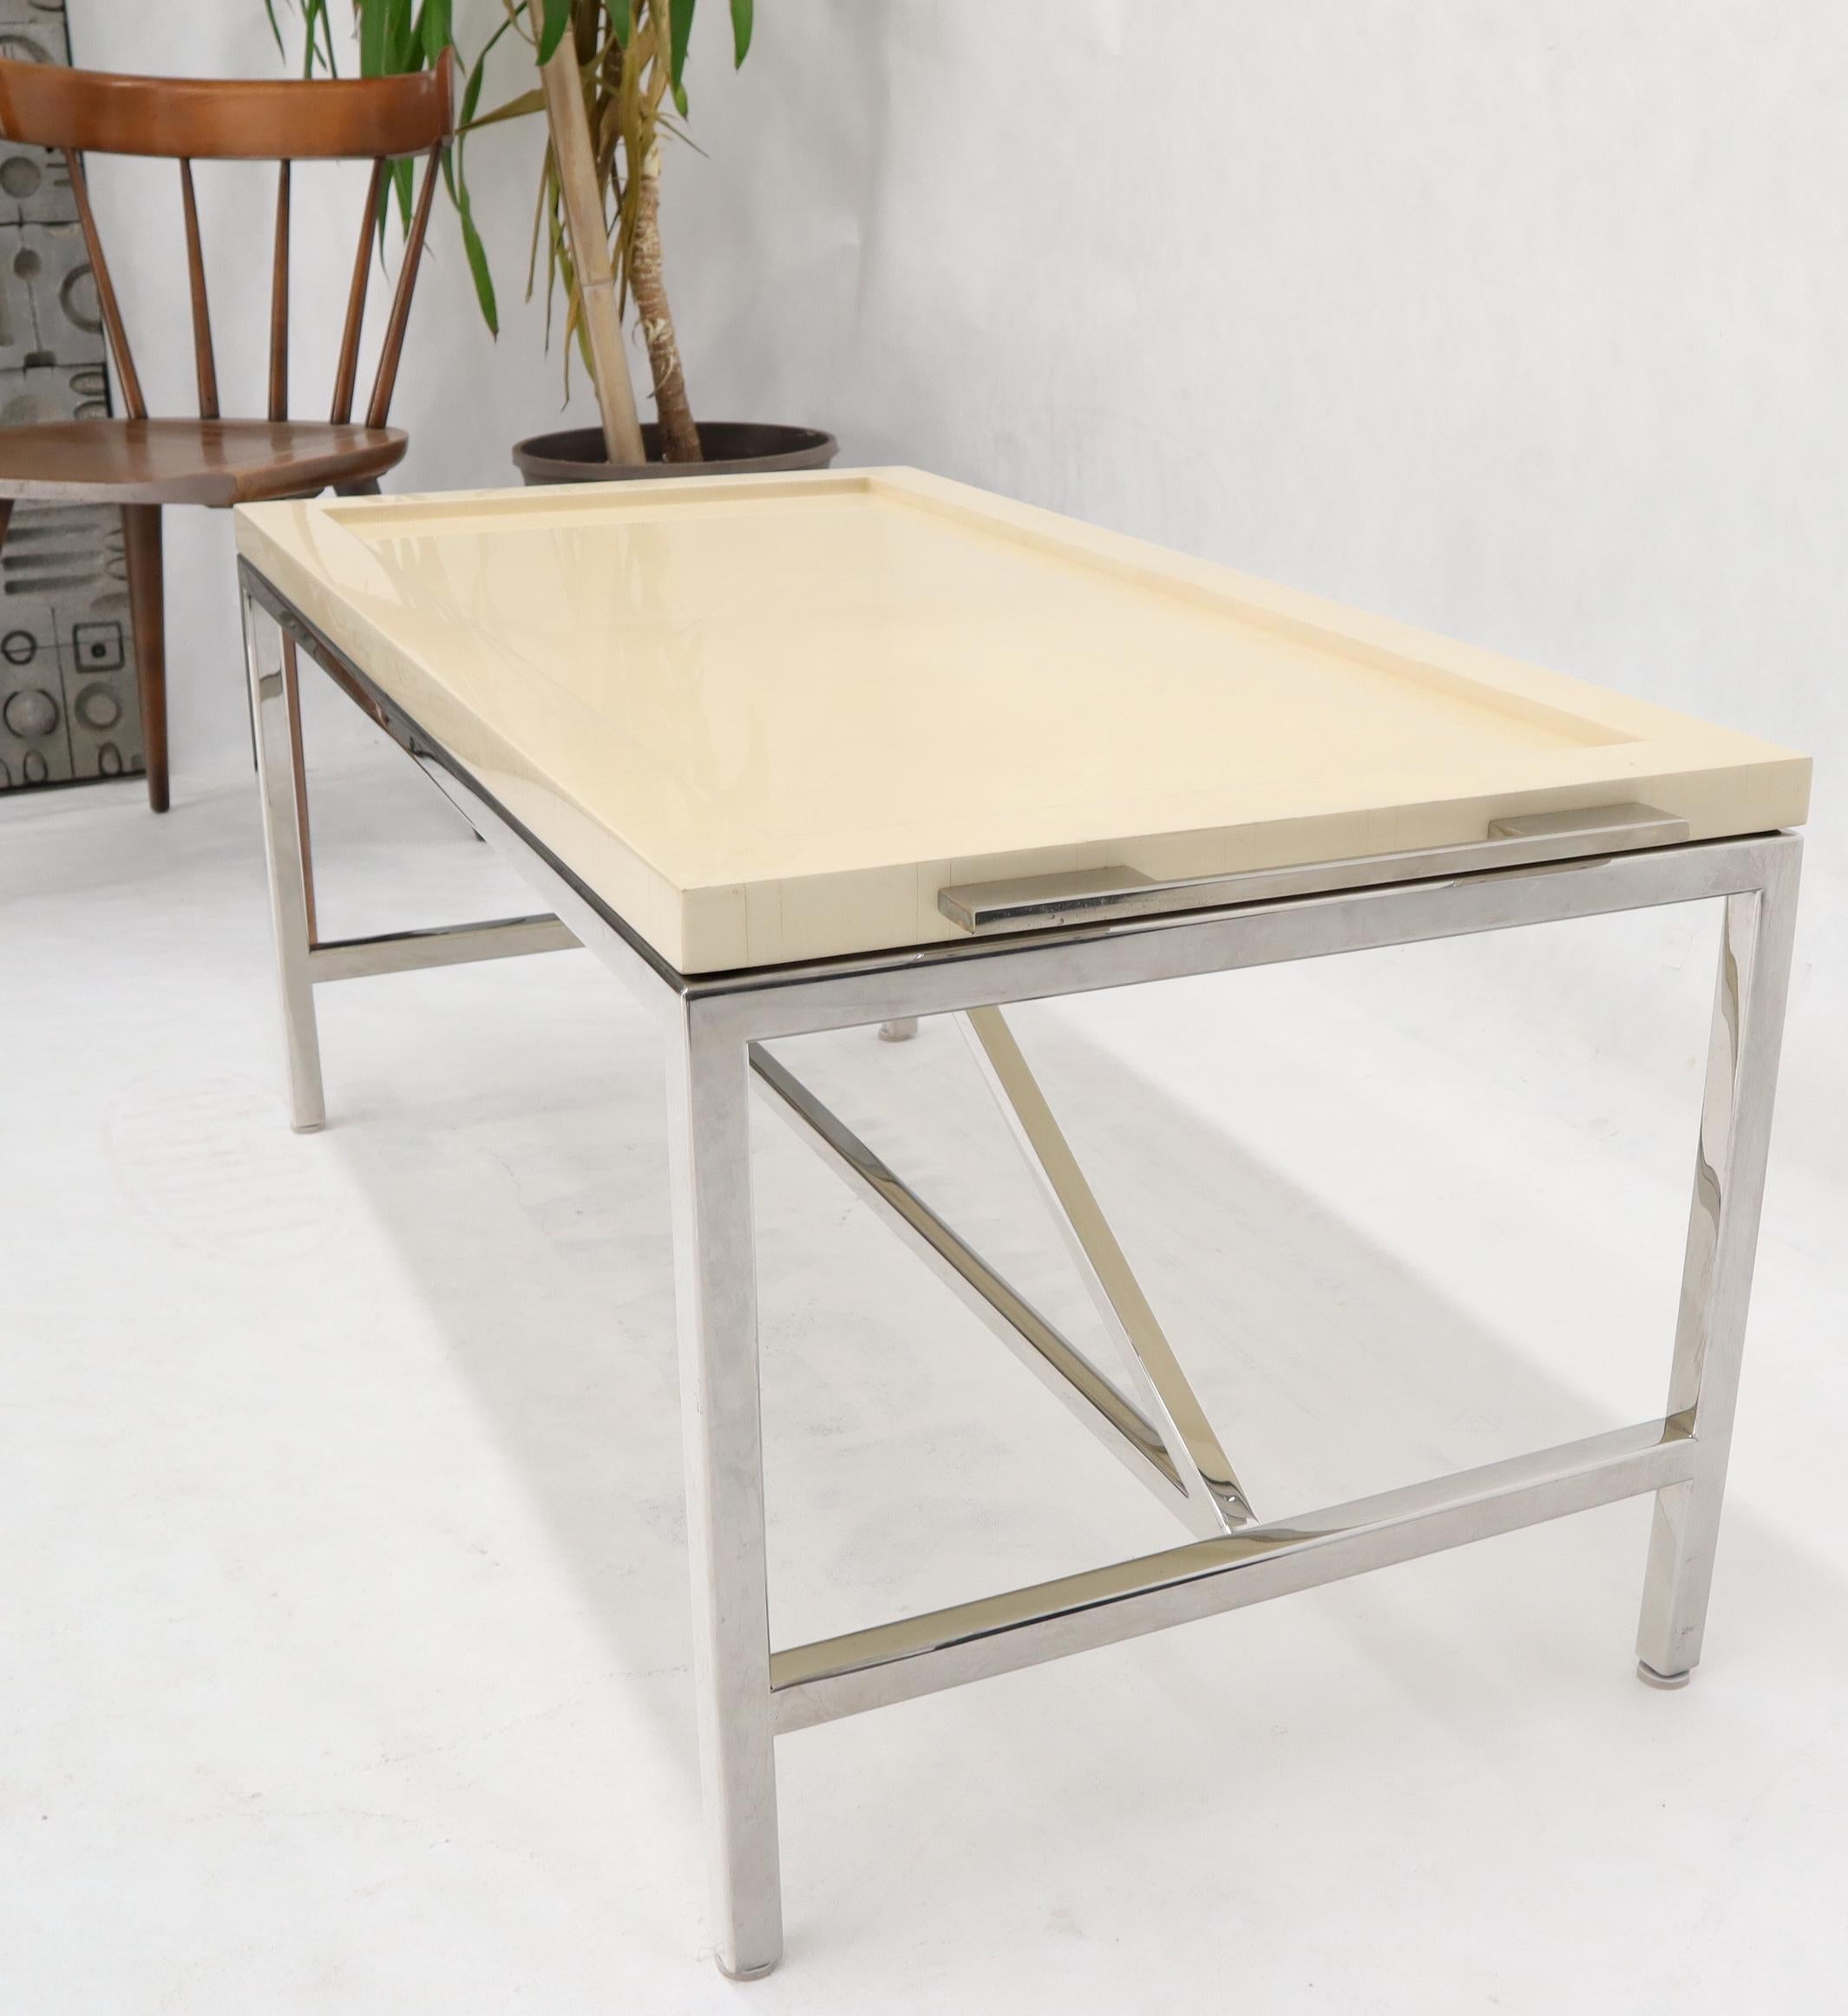 Mid-Century Modern Lacquered Parchment Tray Stainless Steel Base Coffee Table For Sale